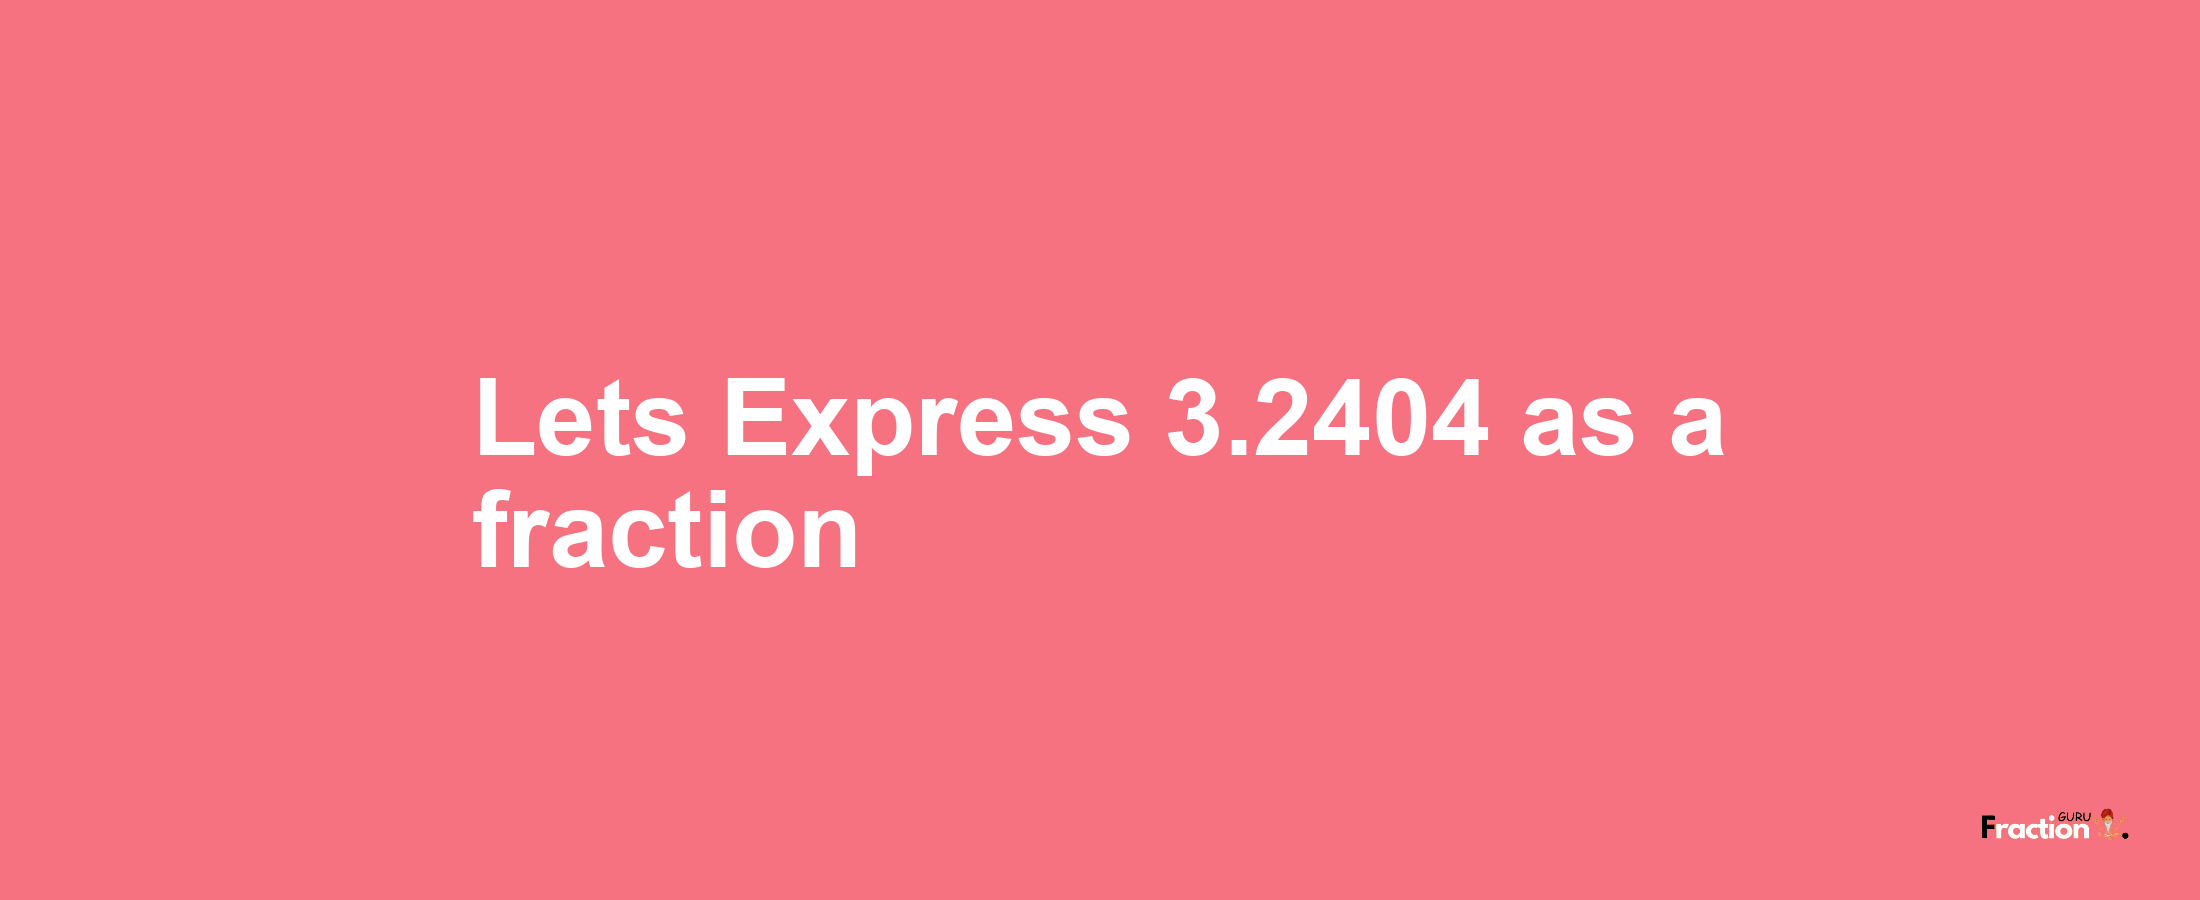 Lets Express 3.2404 as afraction